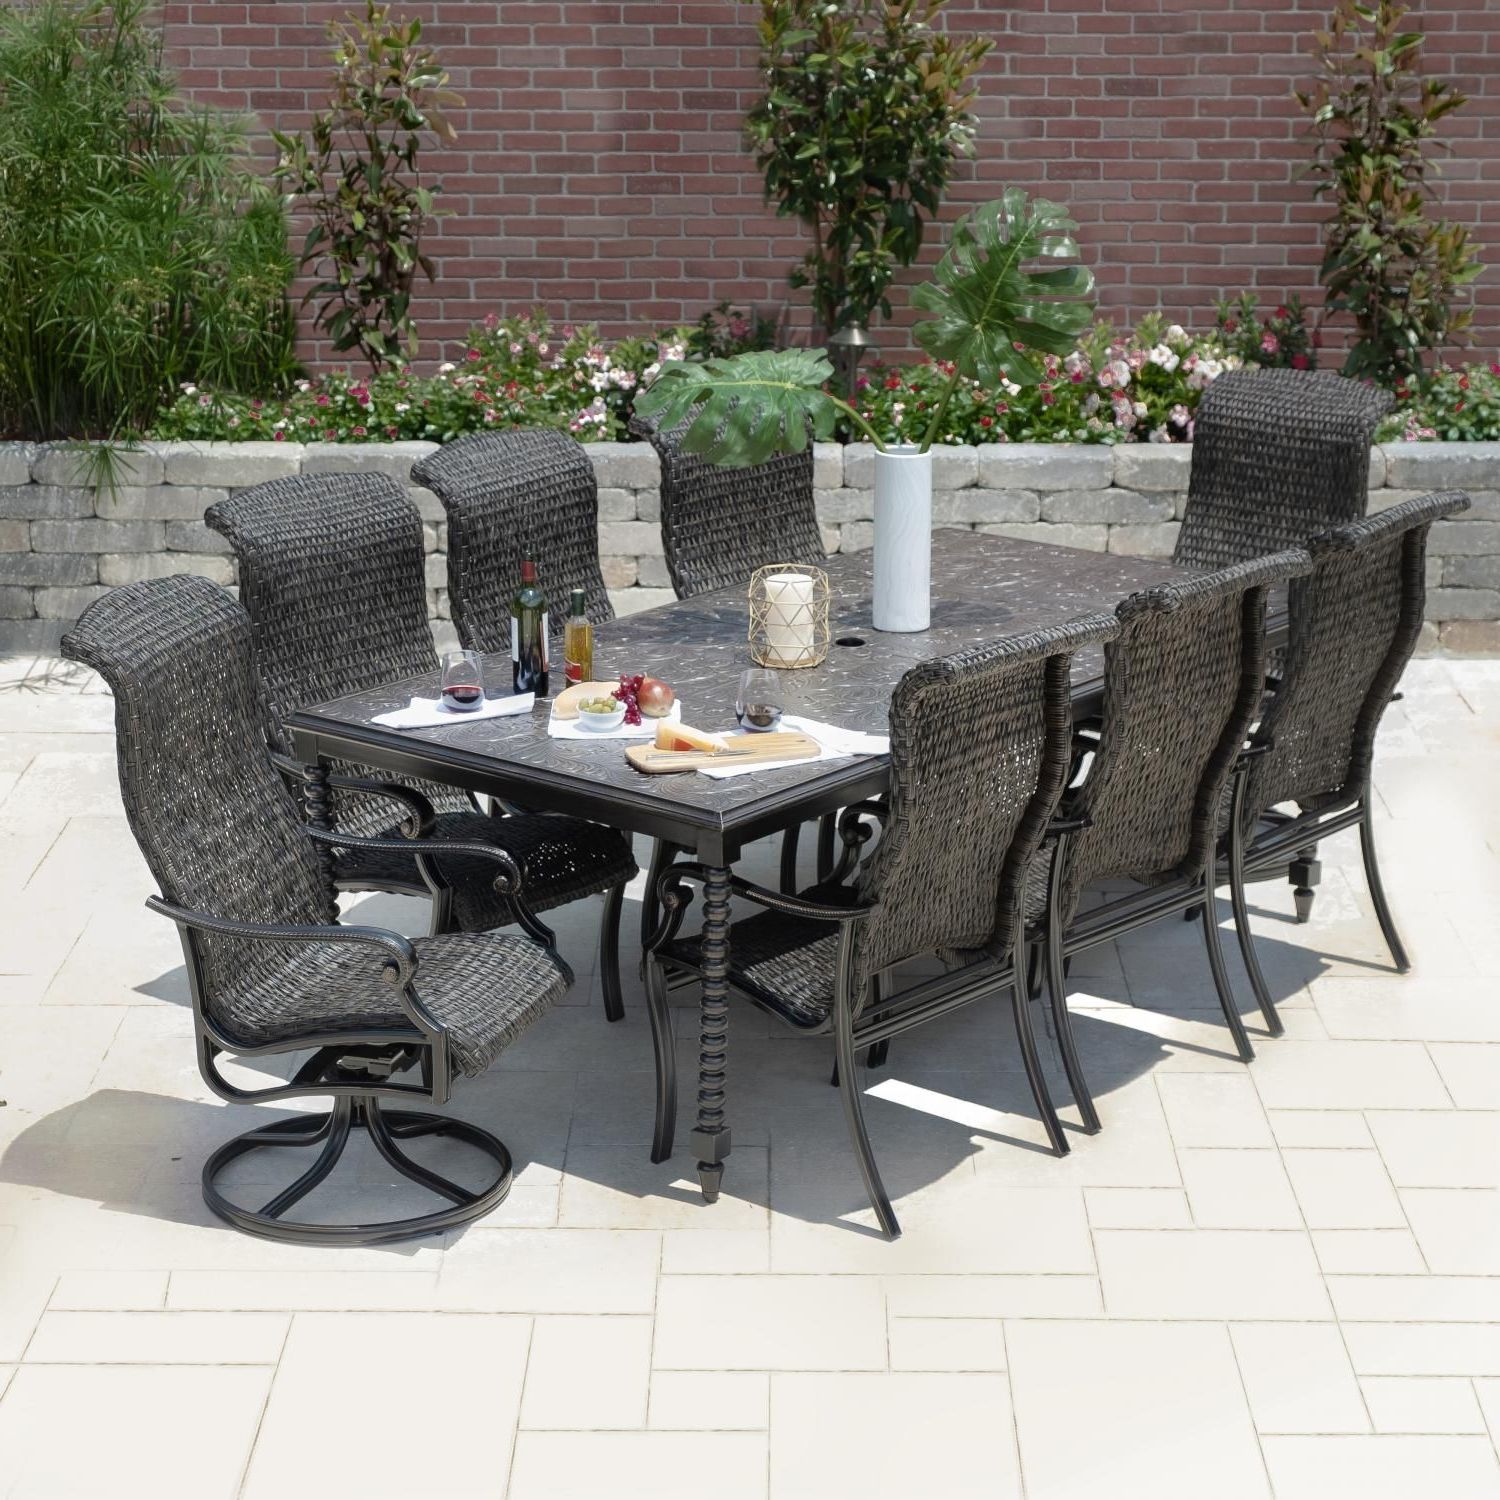 Most Recent Du Monde 9 Piece Banana Leaf Wicker Patio Dining Set W/ 90 X 46 Inch Intended For 9 Piece Patio Dining Sets (View 8 of 15)